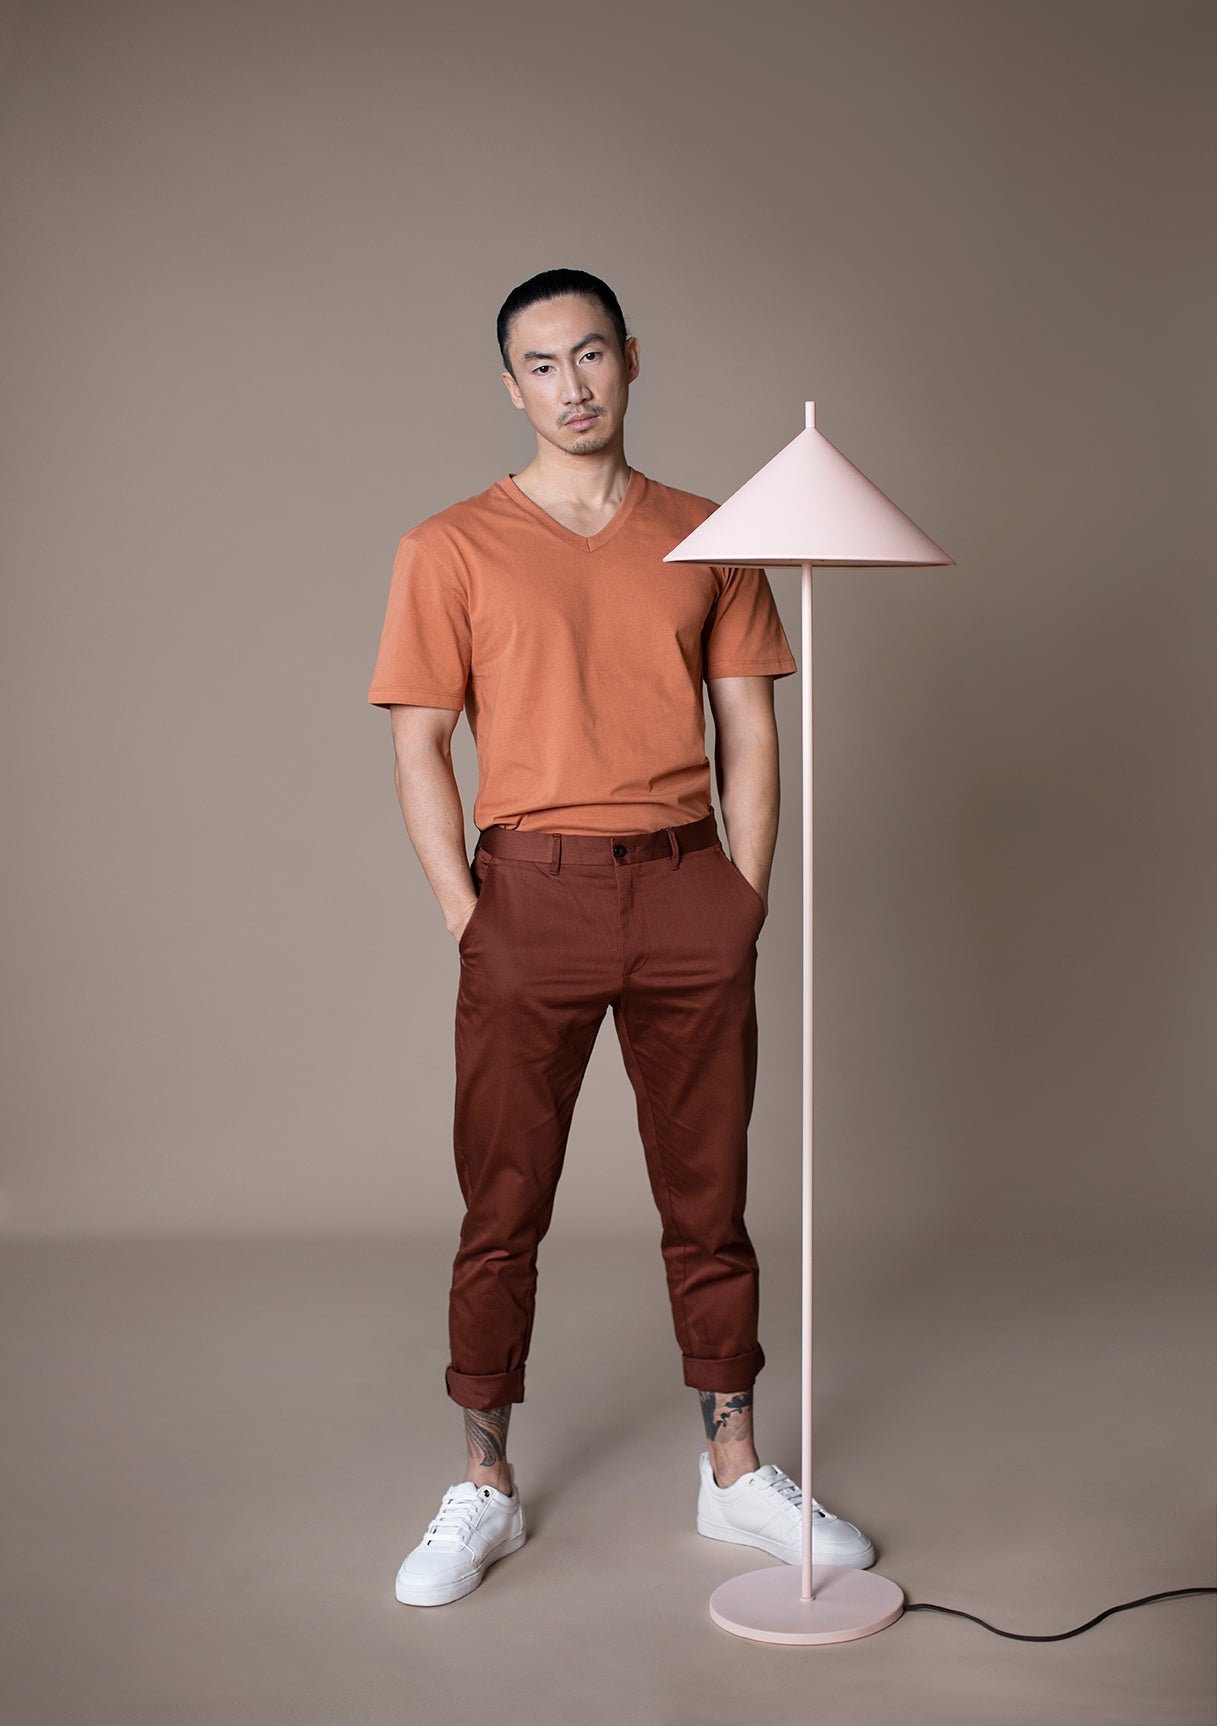 man with orange shirt, maroon pants next to a blush colored metal triangle floor lamp